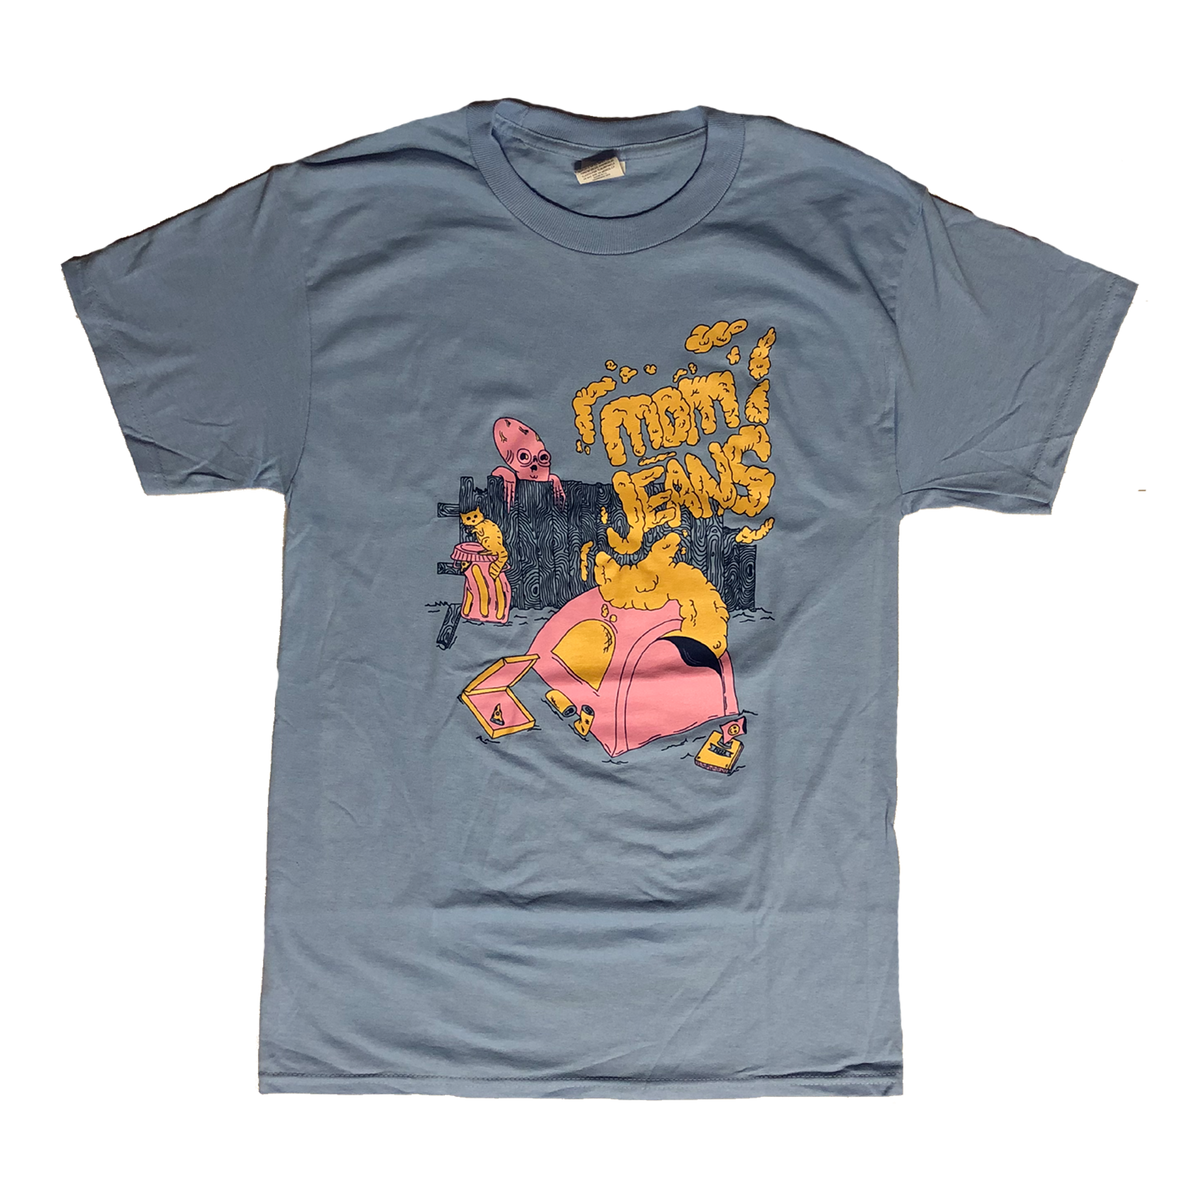 Mom Jeans - Tent Shirt